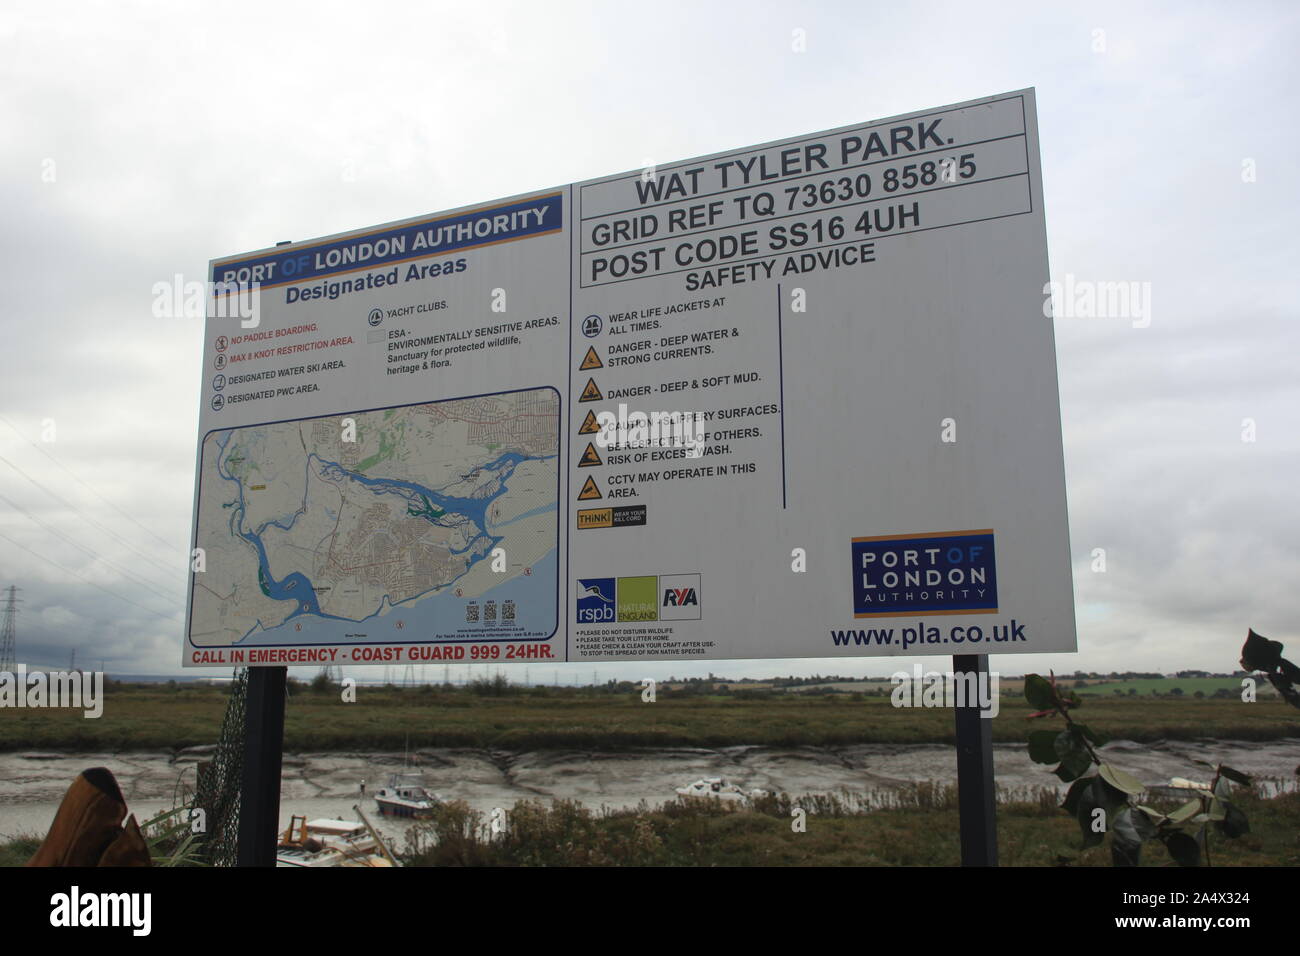 Port of London Authority Sign at Pitsea Creek, Wat Tyler Park, Pitsea, Essex, Britain. Stock Photo